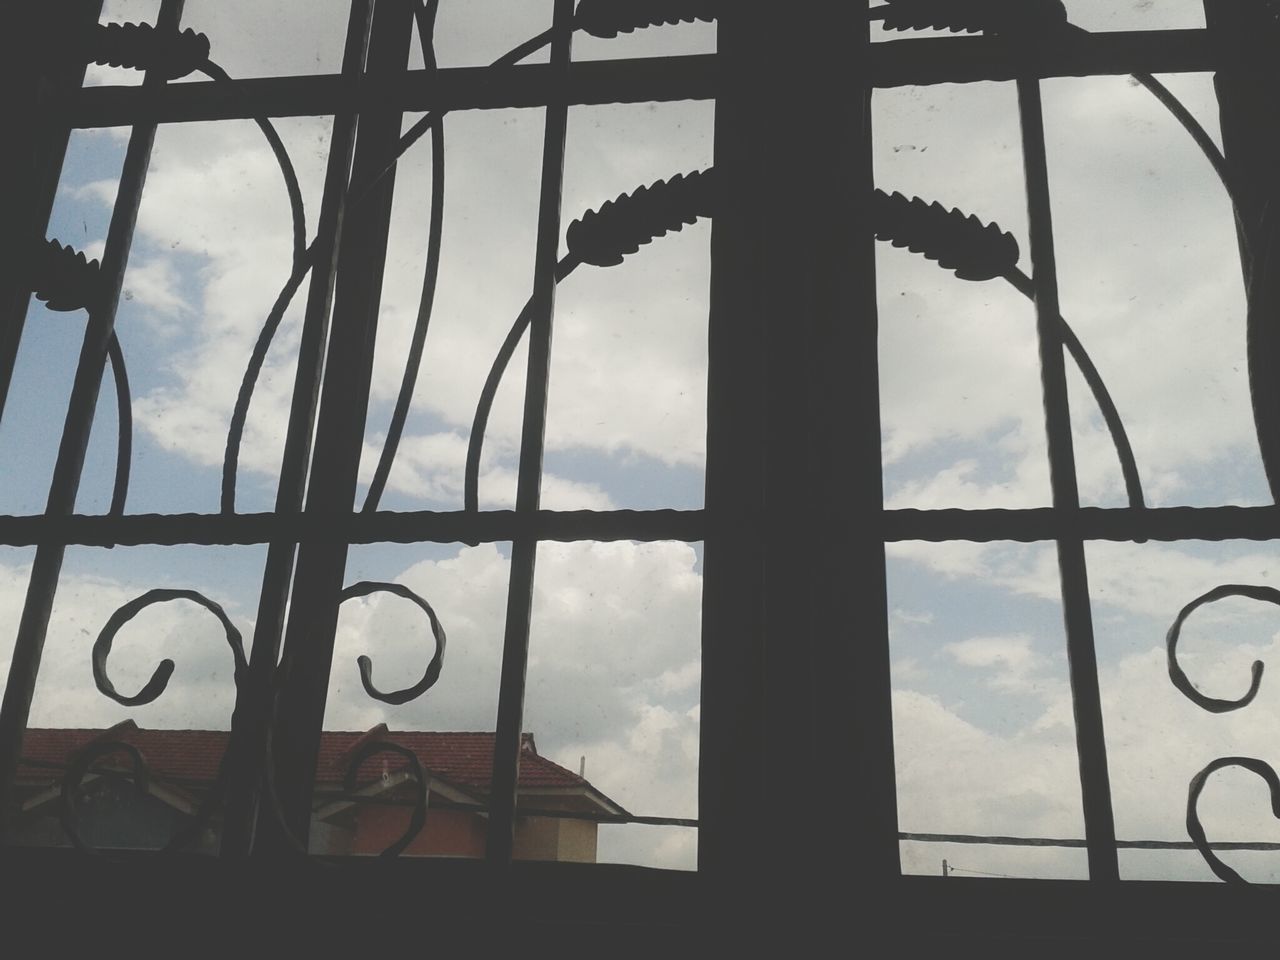 sky, cloud - sky, cloudy, low angle view, silhouette, cloud, metal, built structure, window, weather, architecture, overcast, dusk, day, no people, indoors, metallic, fence, safety